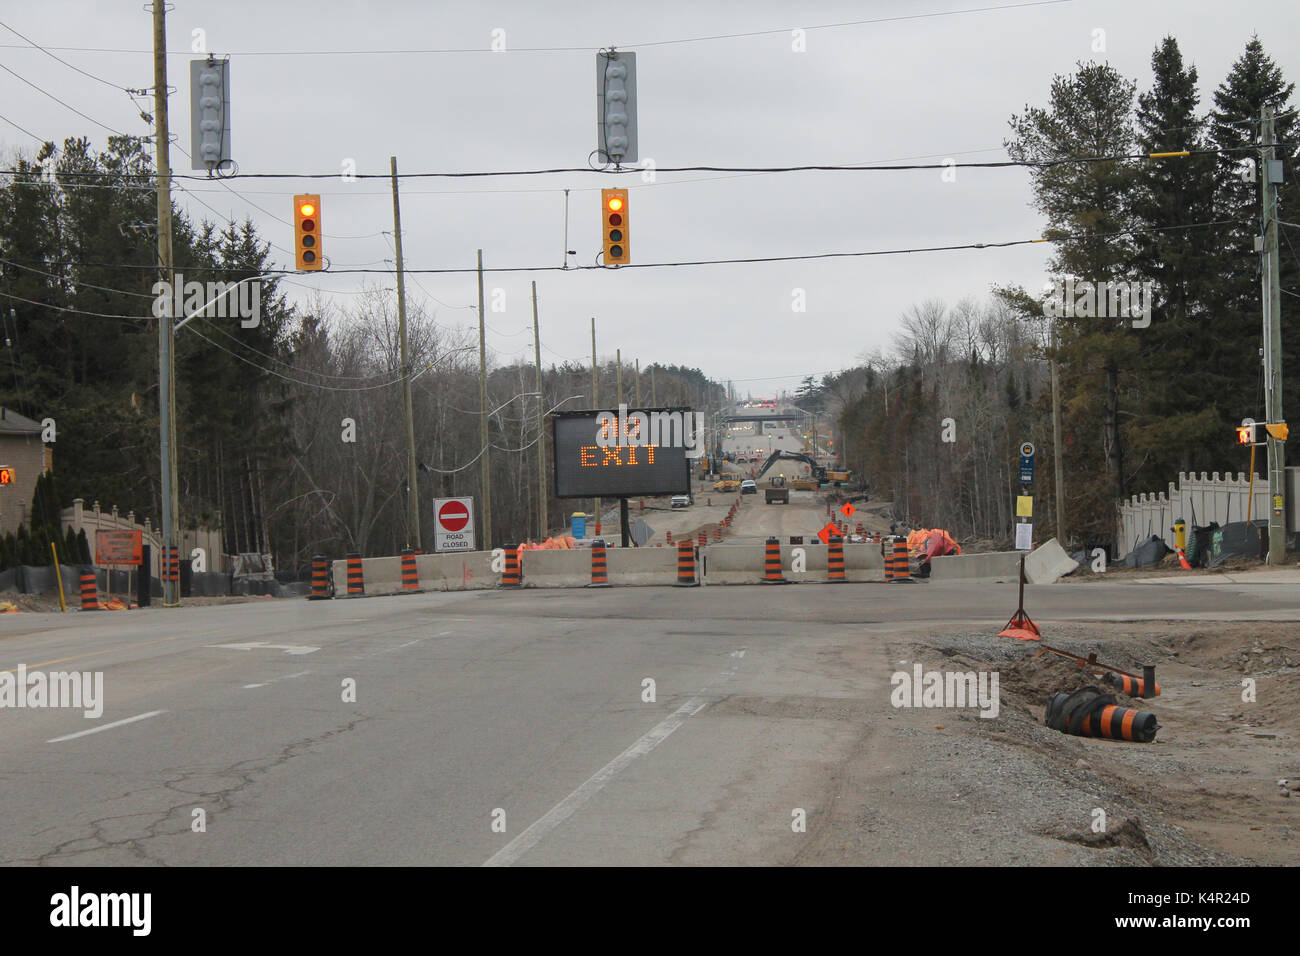 Mapleview Drive, Barrie, Ontario closed for construction 'No Exit' sign in the middle. Crews working hard to get open by 5 week schedule deadline. Stock Photo